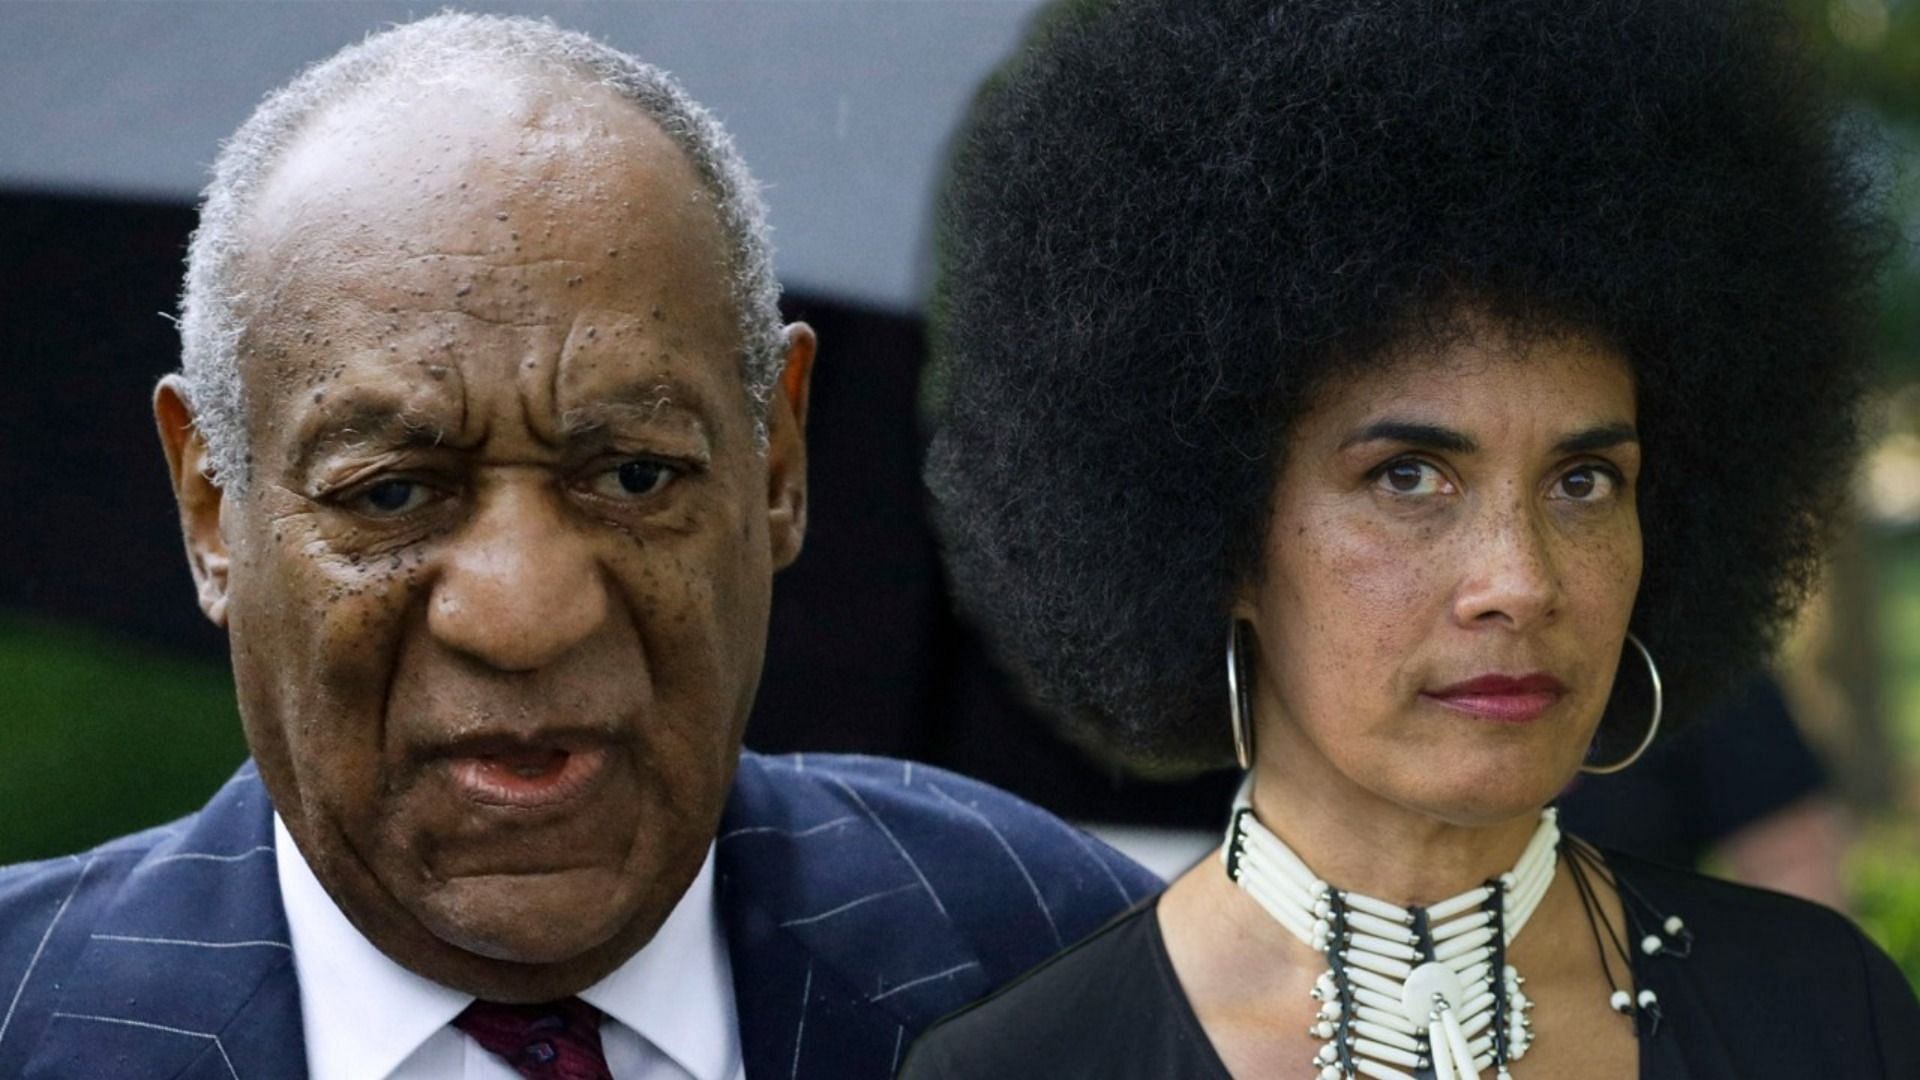 Lili Bernard has filed a lawsuit against Bill Cosby (Image via Getty Images)